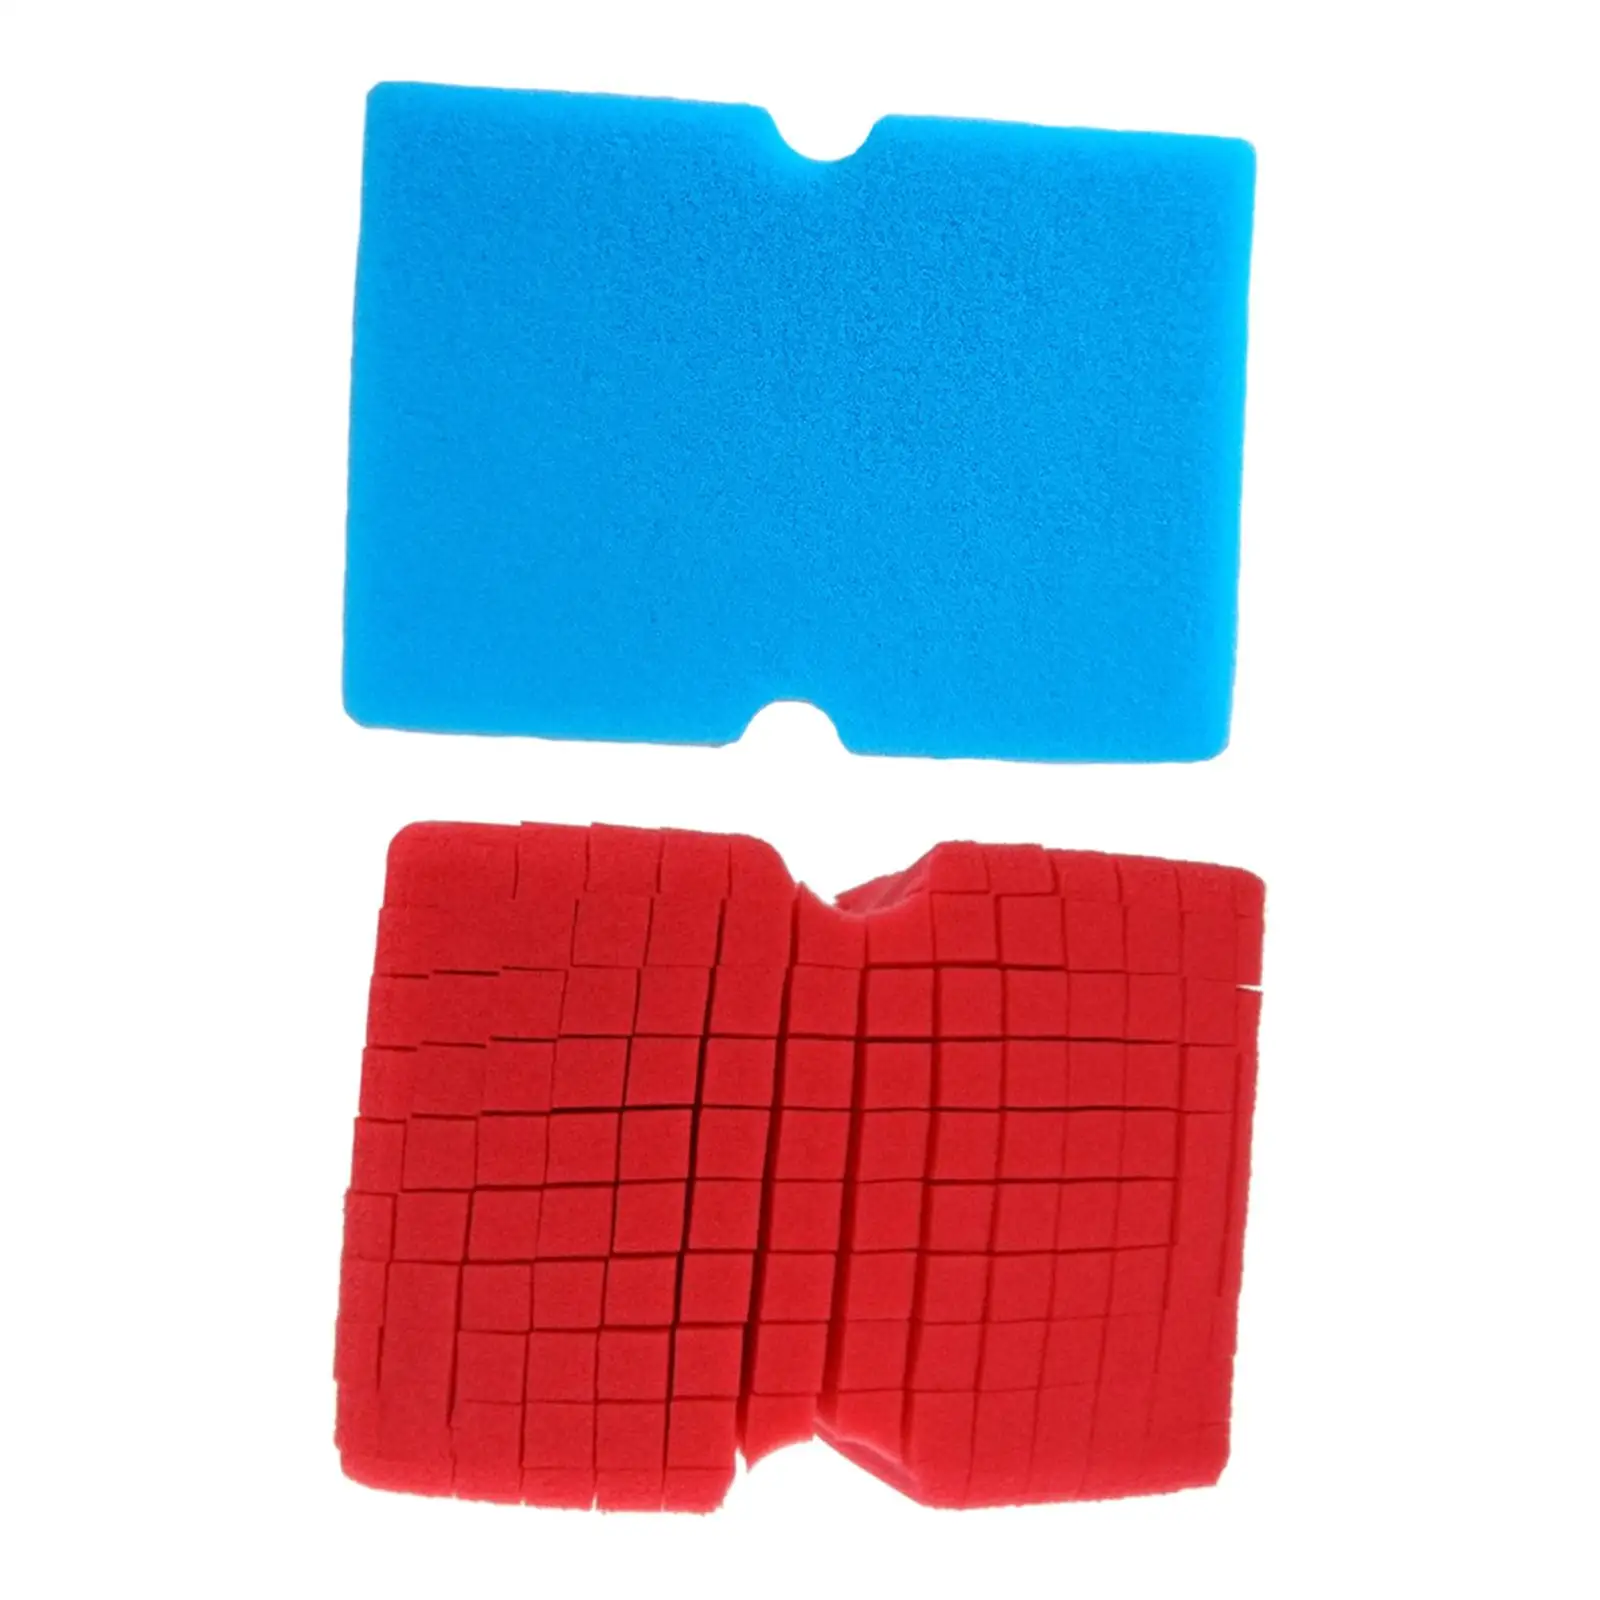 Damp Clean Duster Sponge Non Scratch Large Thick Multi Functional Soft Car Wash Sponge for Bathtub Boats Trucks Motorcycles